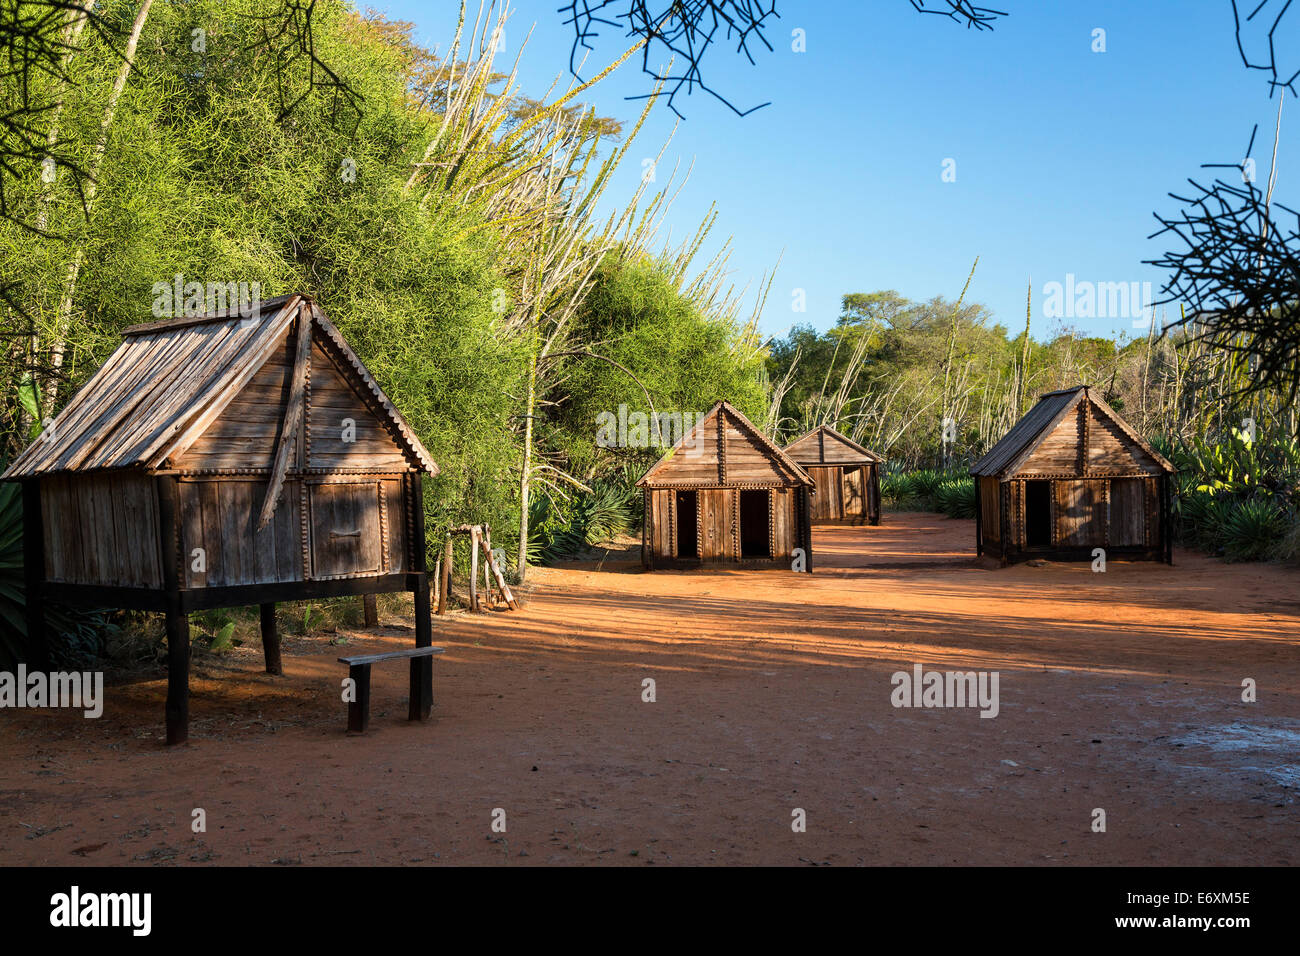 Museum village of the Antandroy tribe, Berenty Reserve, South Madagascar, Africa Stock Photo